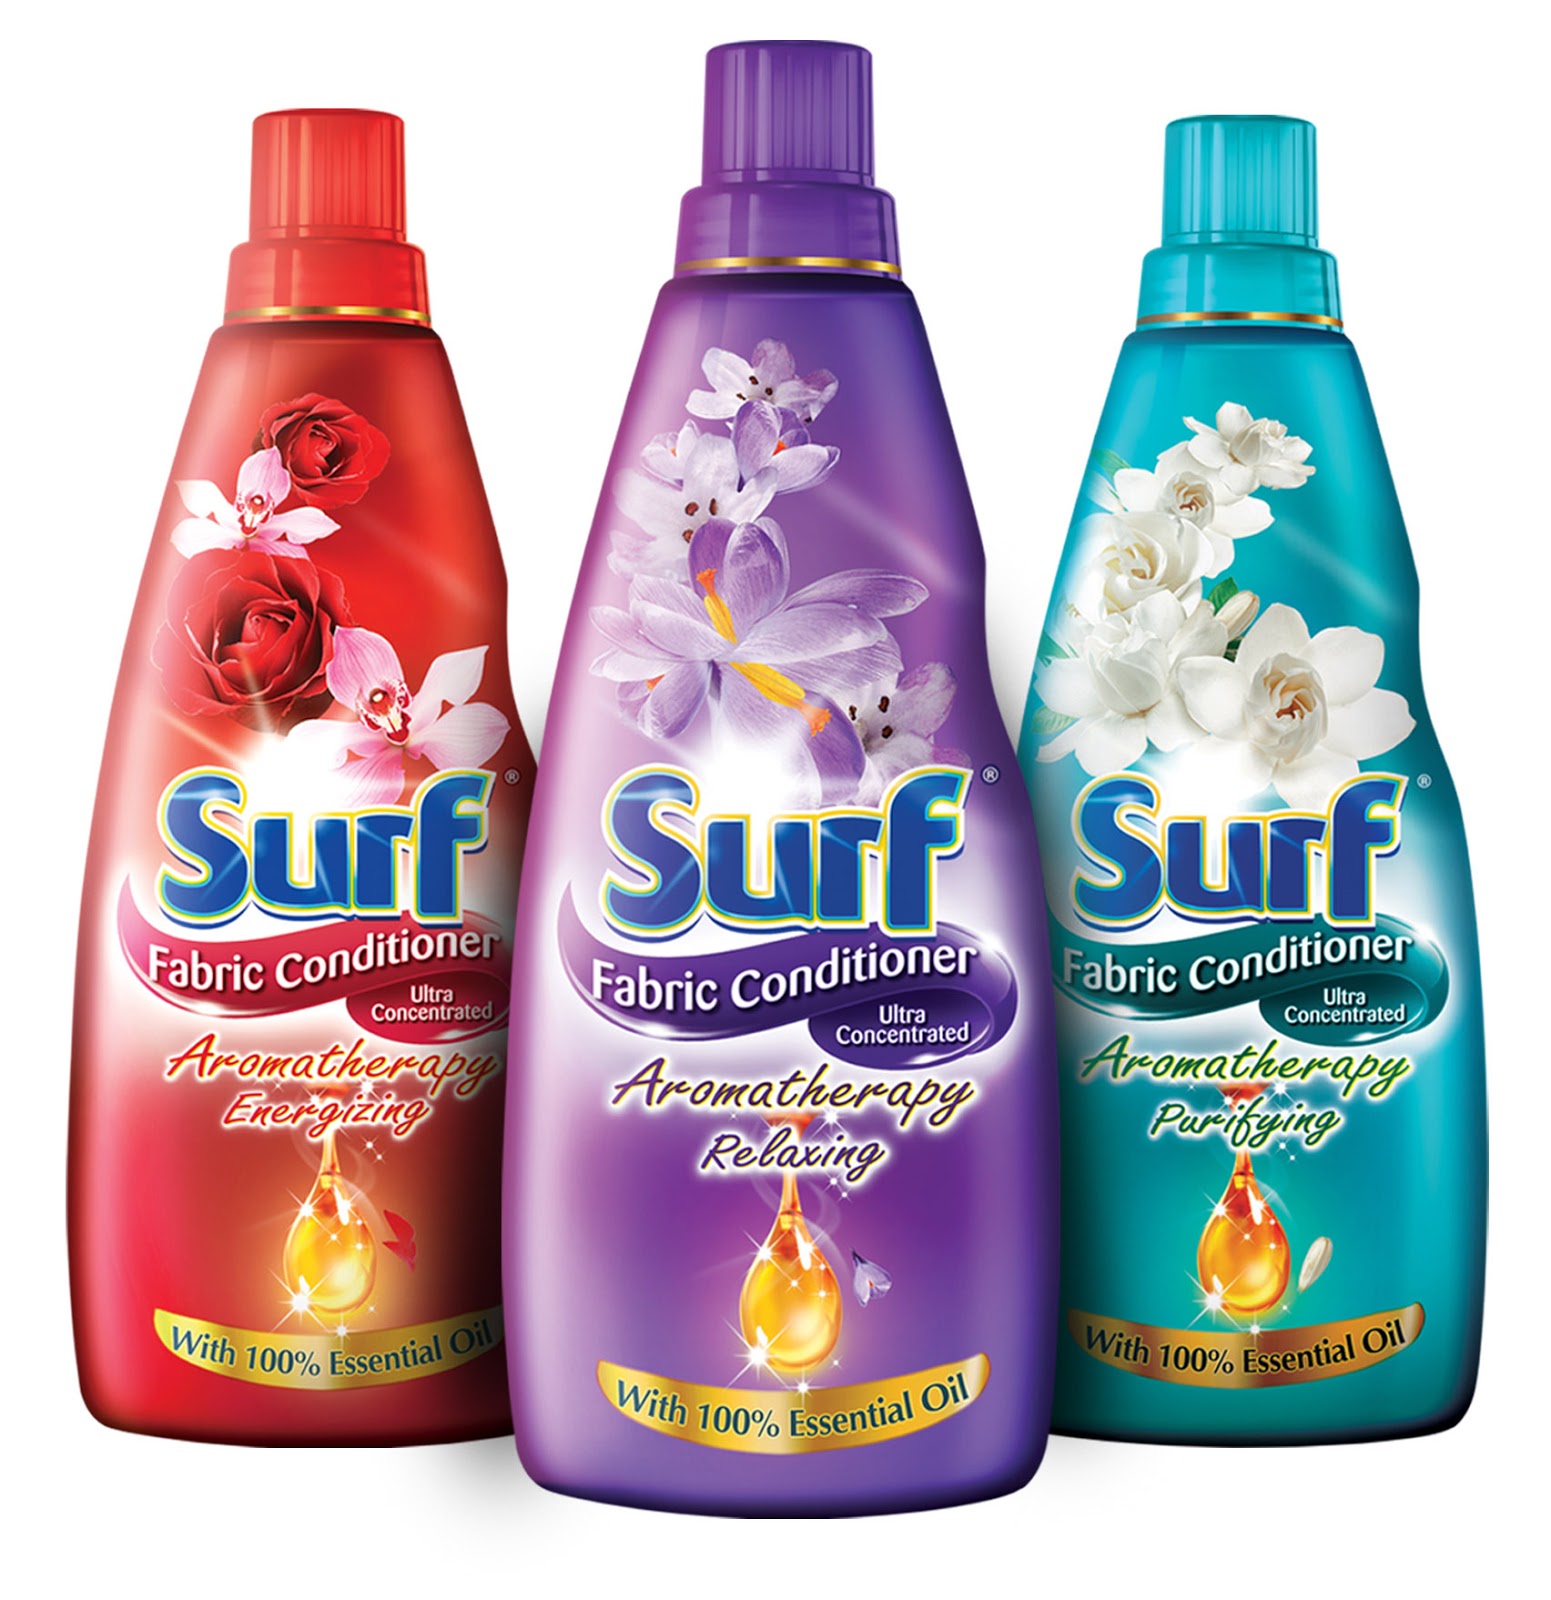 Wonder Woman Rises: Surf Fabric Conditioner: Now with Aromatherapy